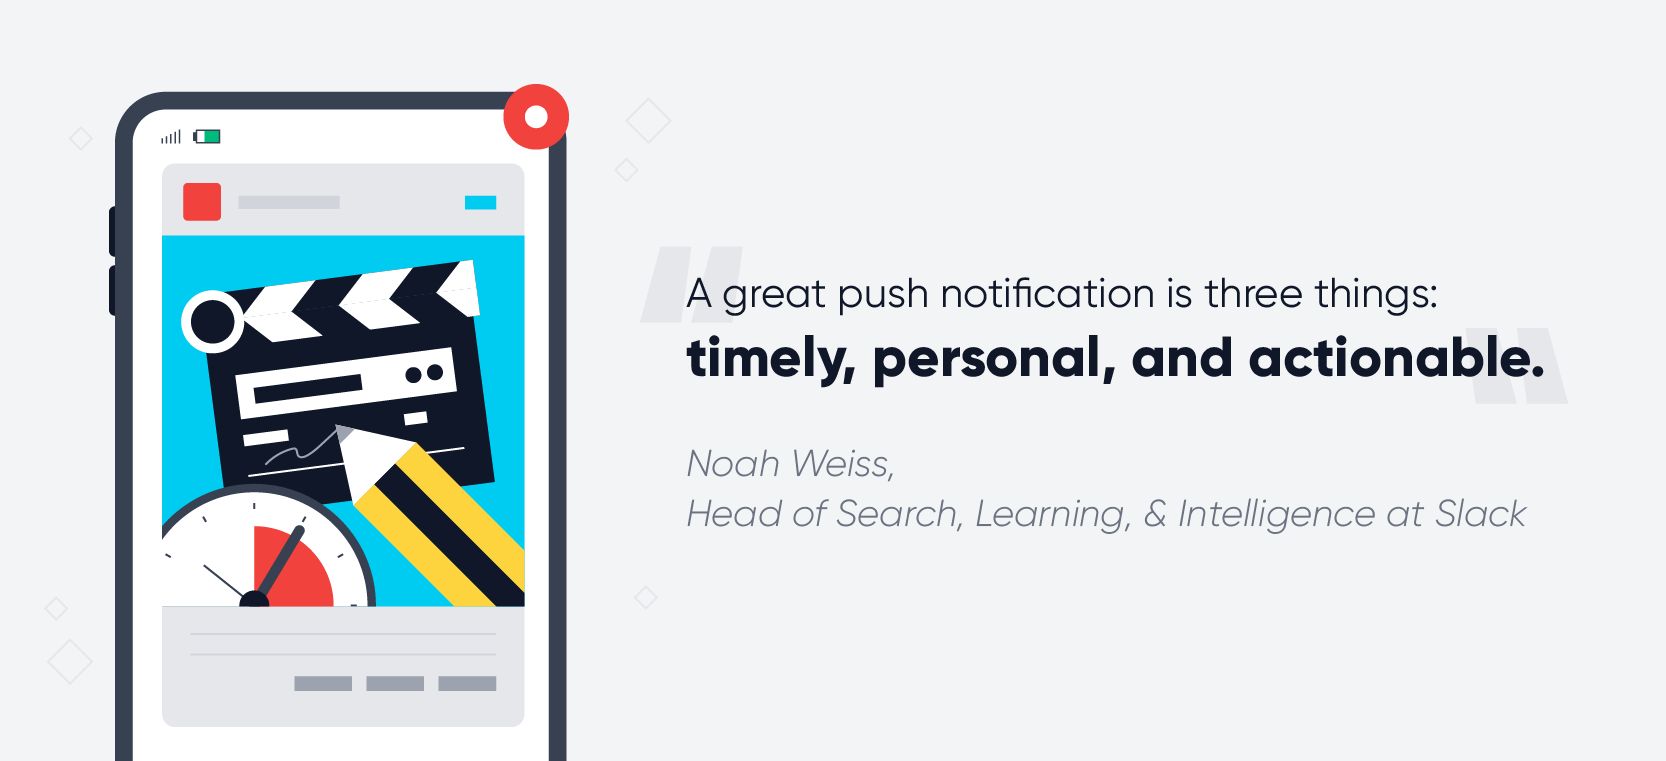 A great push notification is three things. - quote on push notification best practices